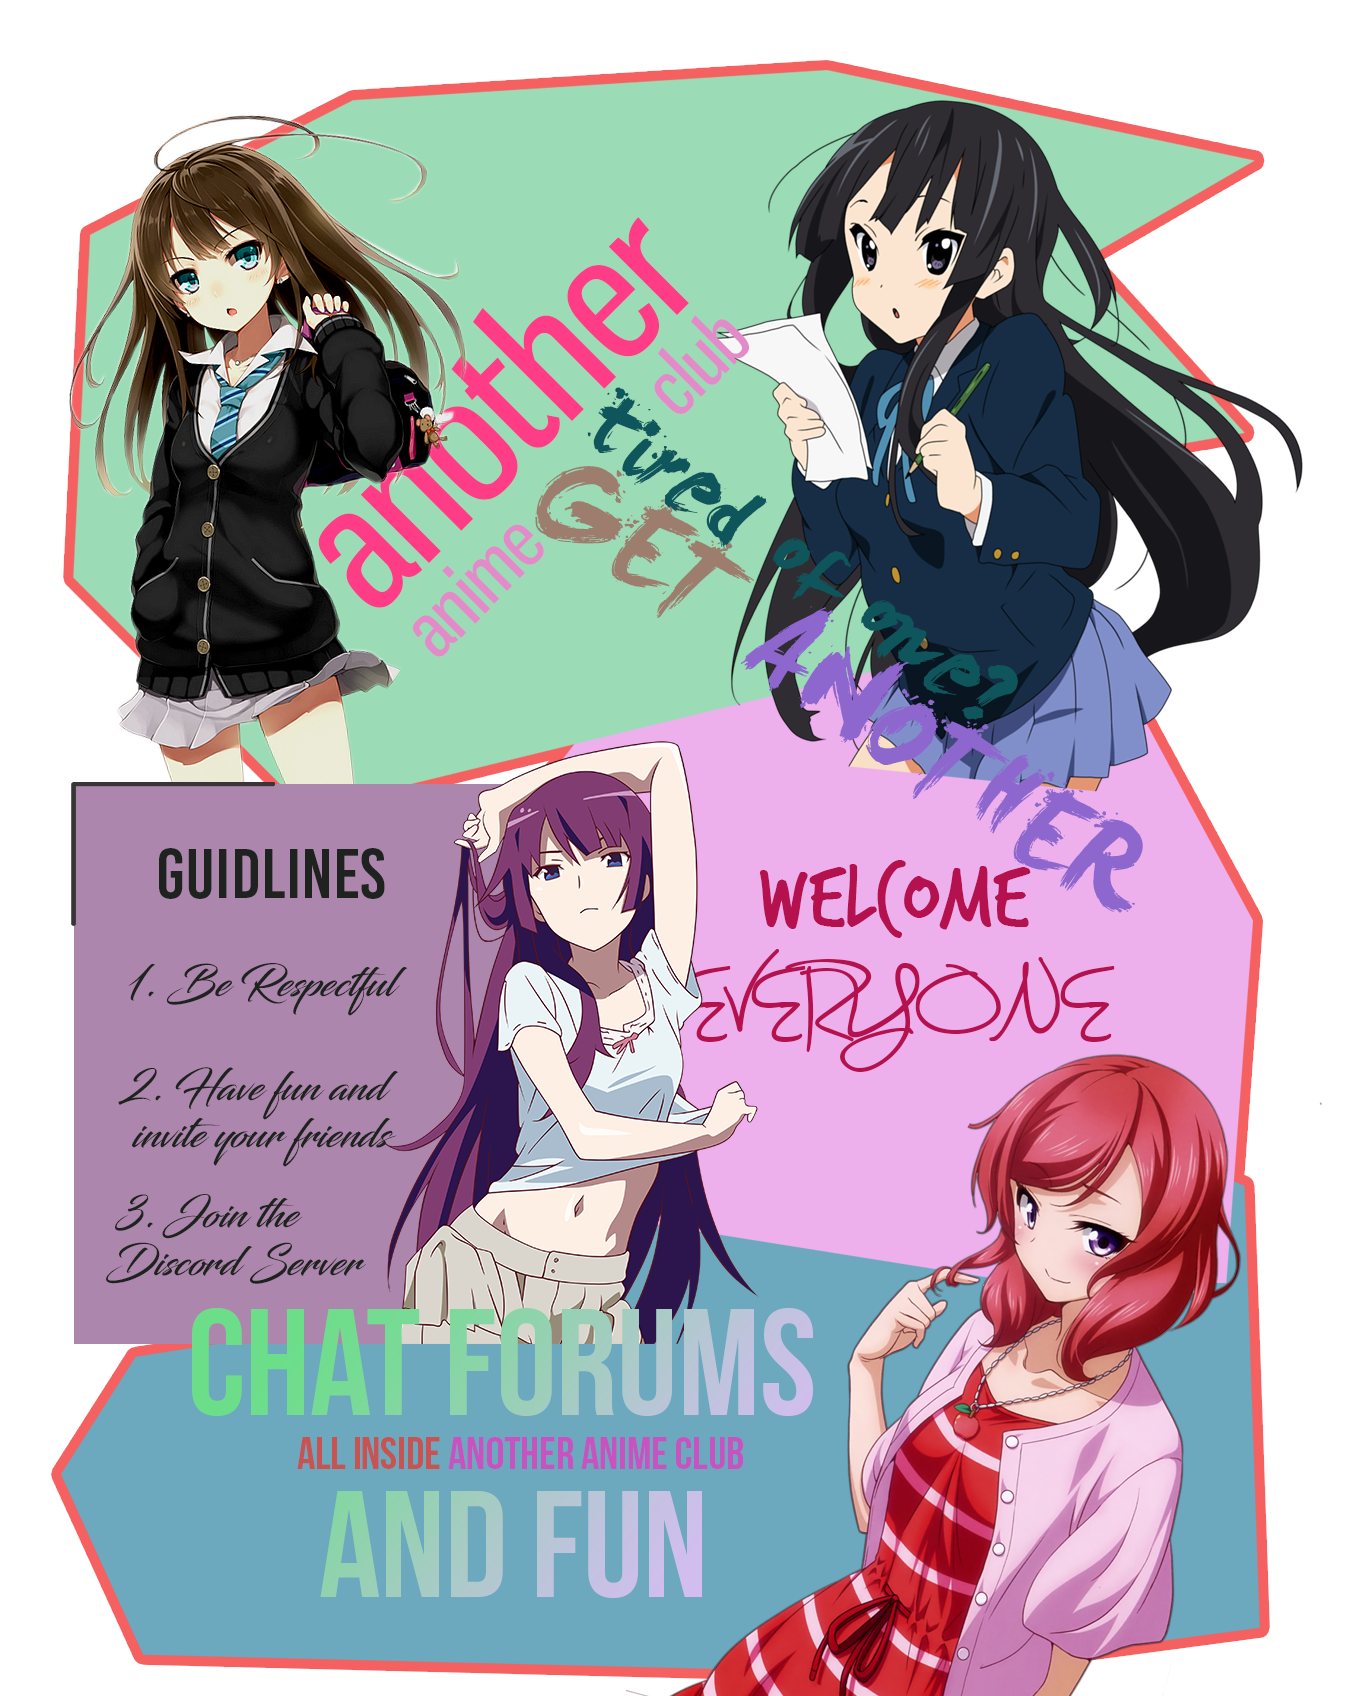 Another Anime Club - Club 